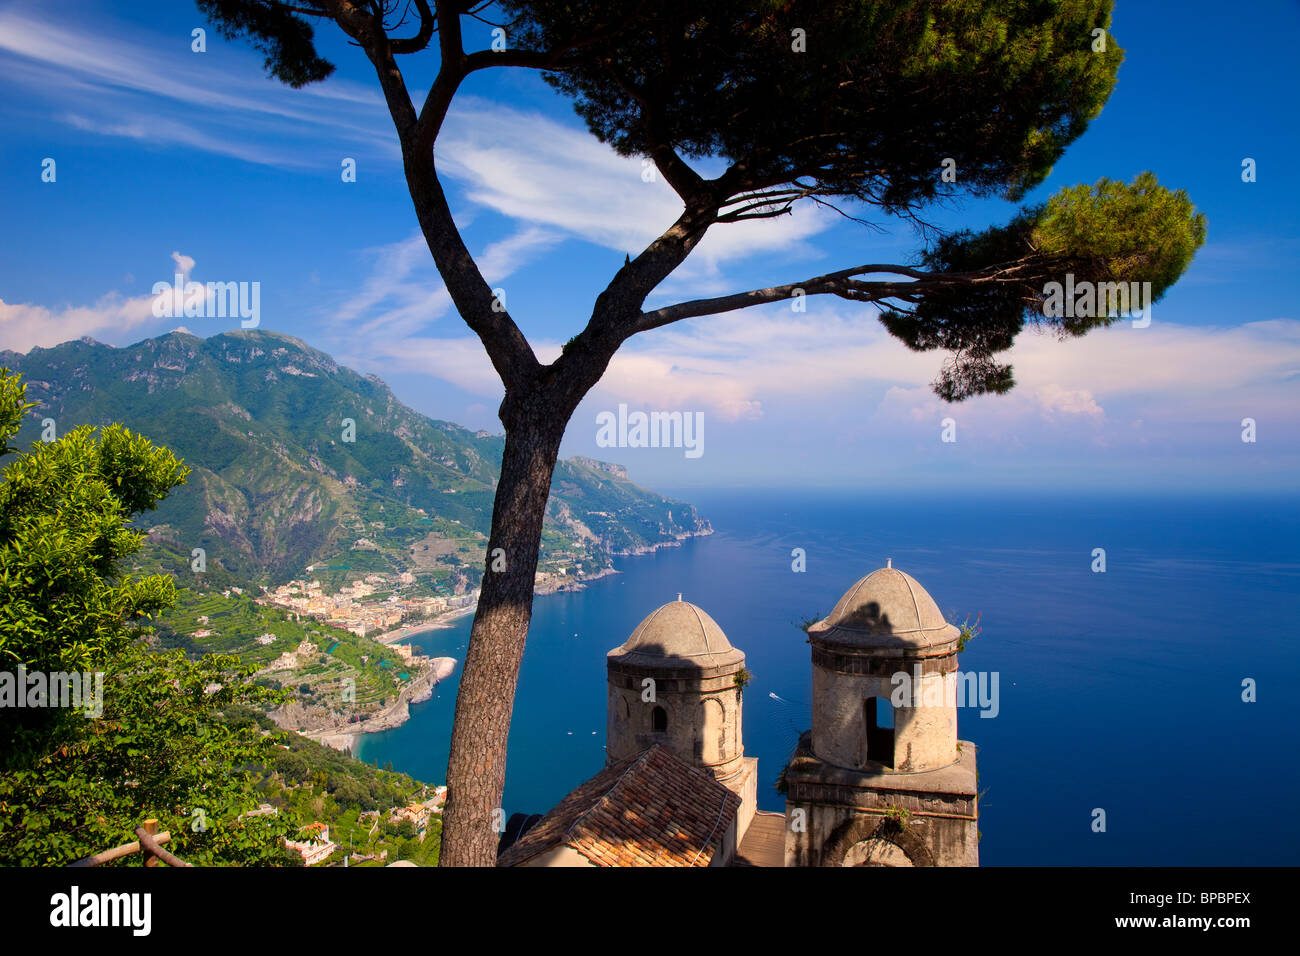 View of the Amalfi Coast from Villa Rufolo in the hilltop town of Ravello in Campania Italy Stock Photo